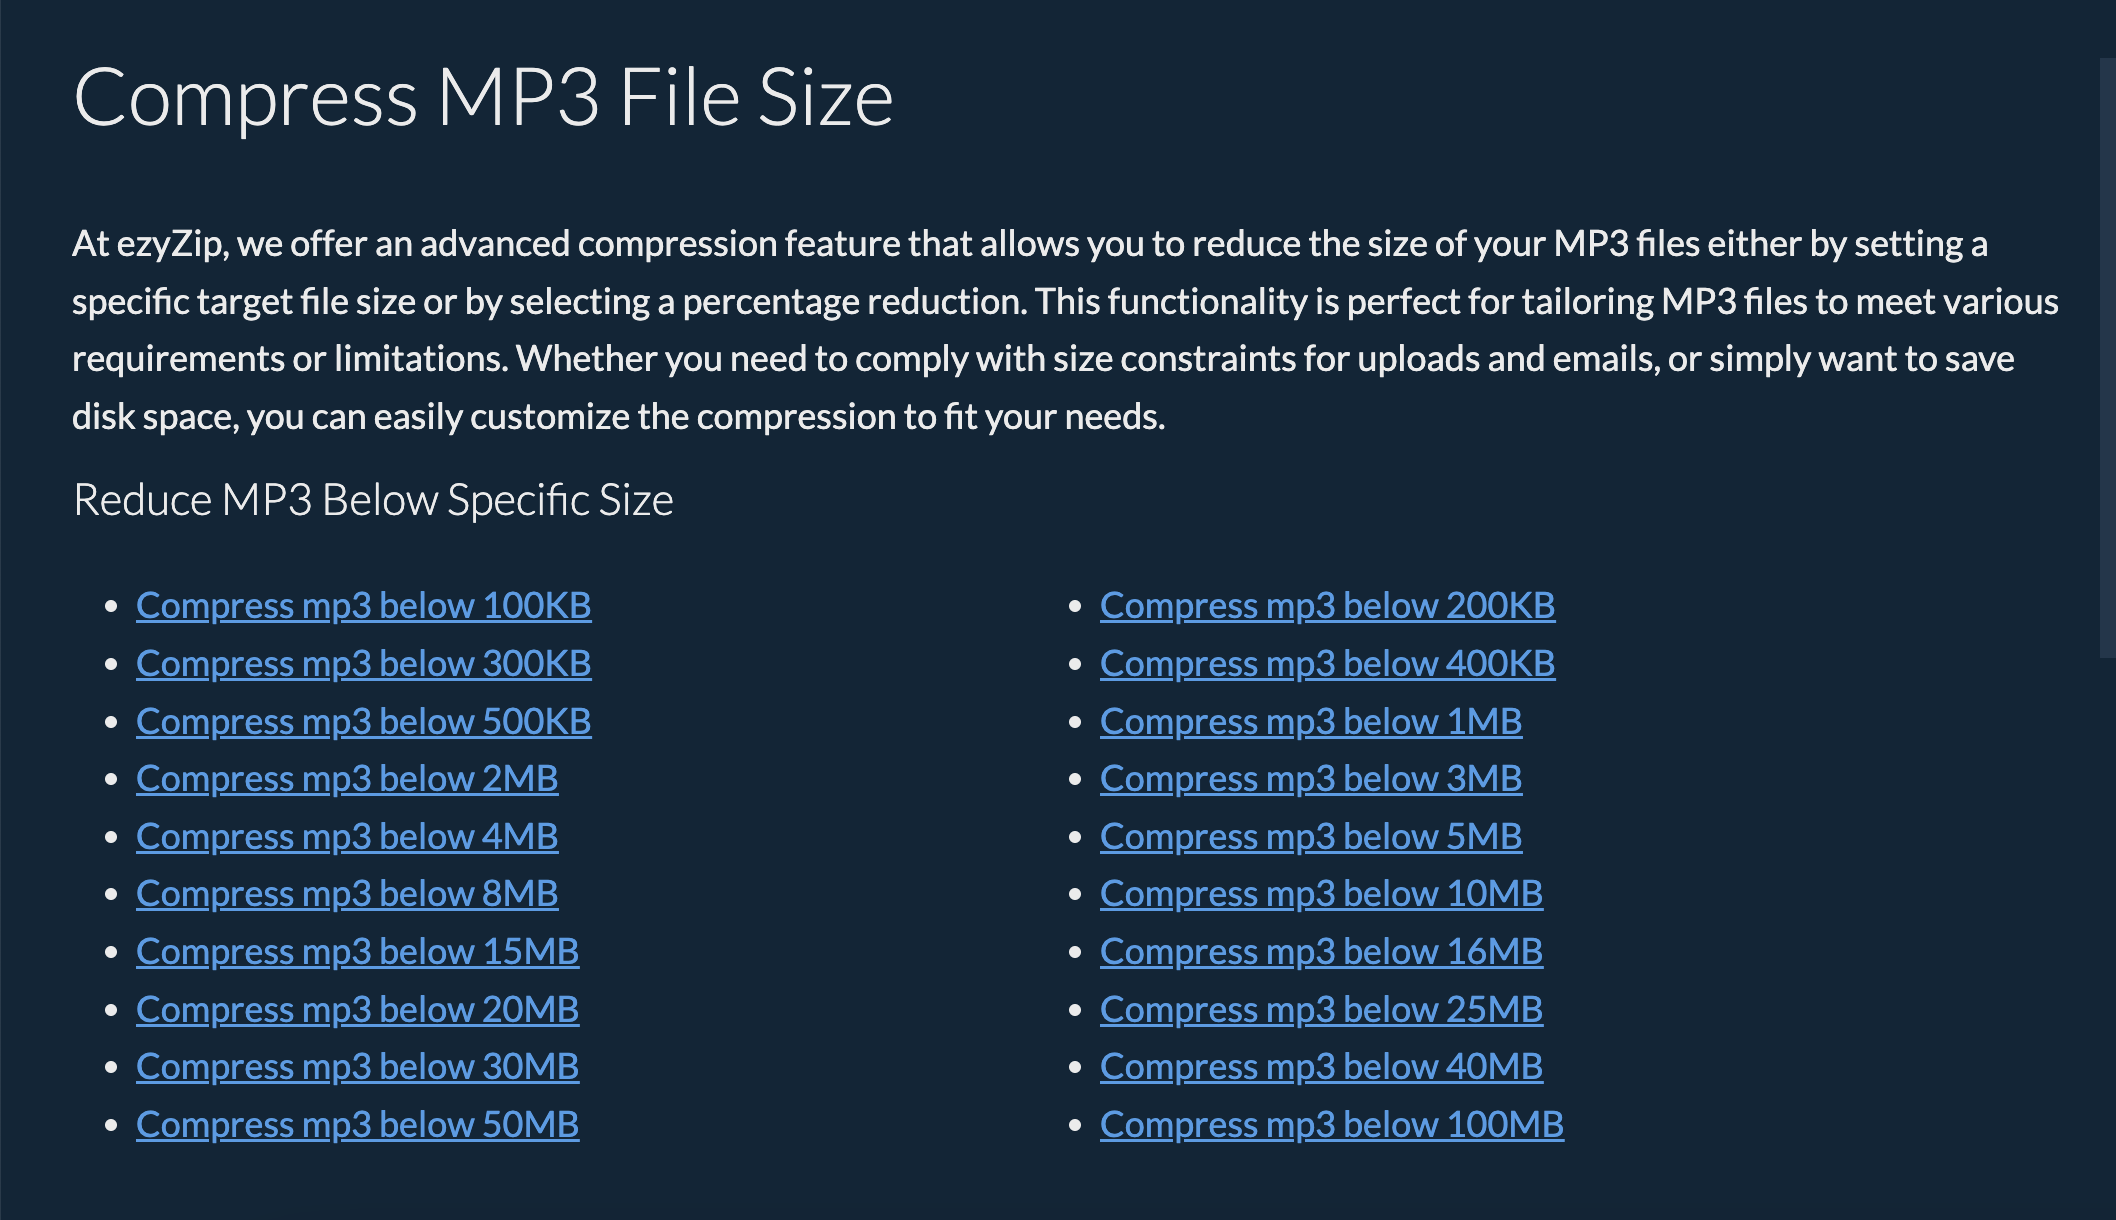 How To Reduce MP3 File Size Using EzyZip: Step 1